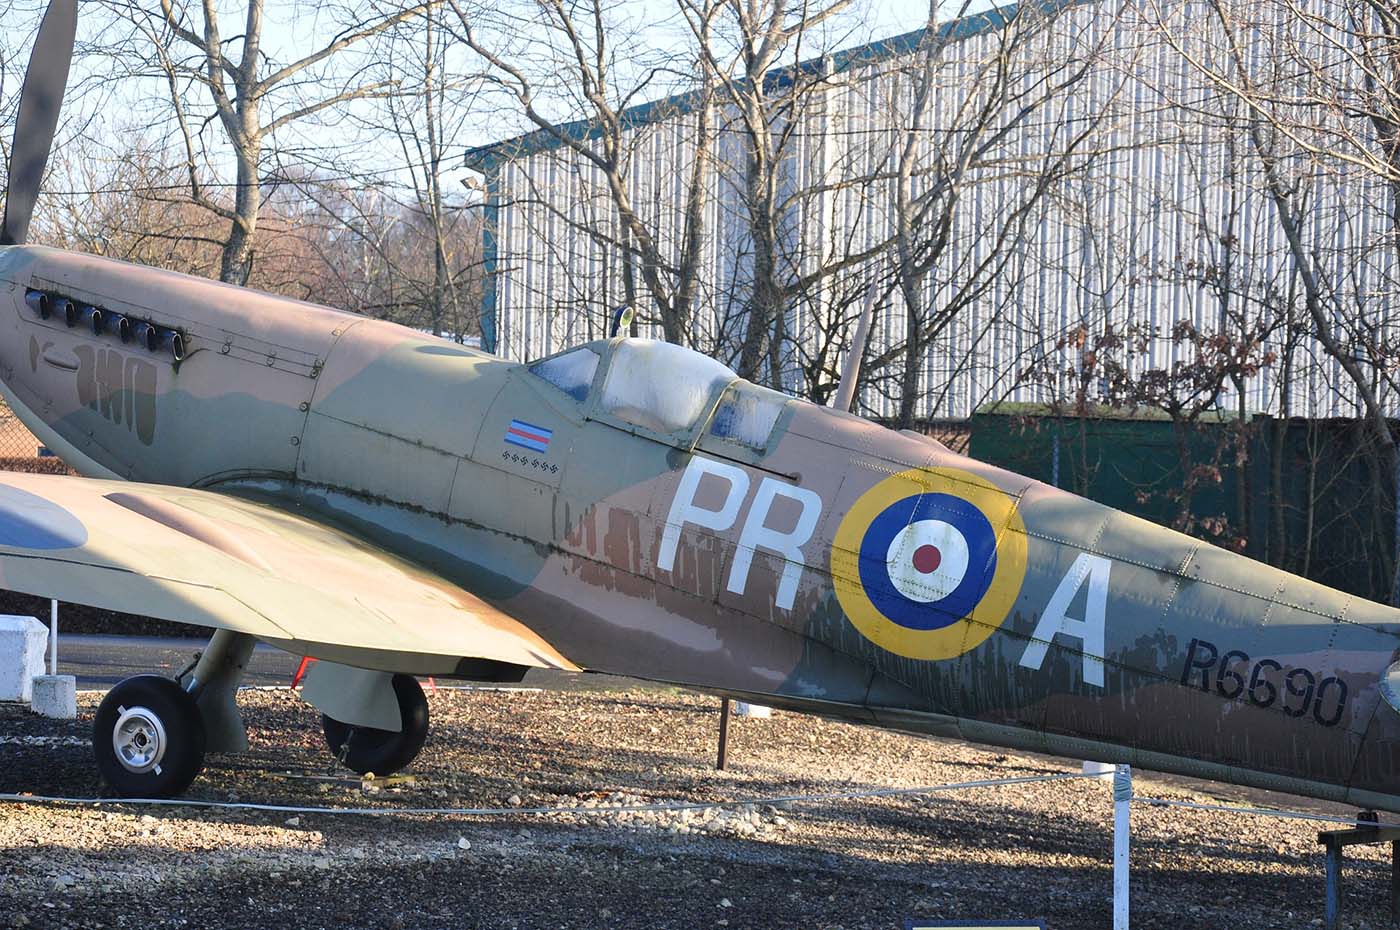 spitfire yorkshire air museum